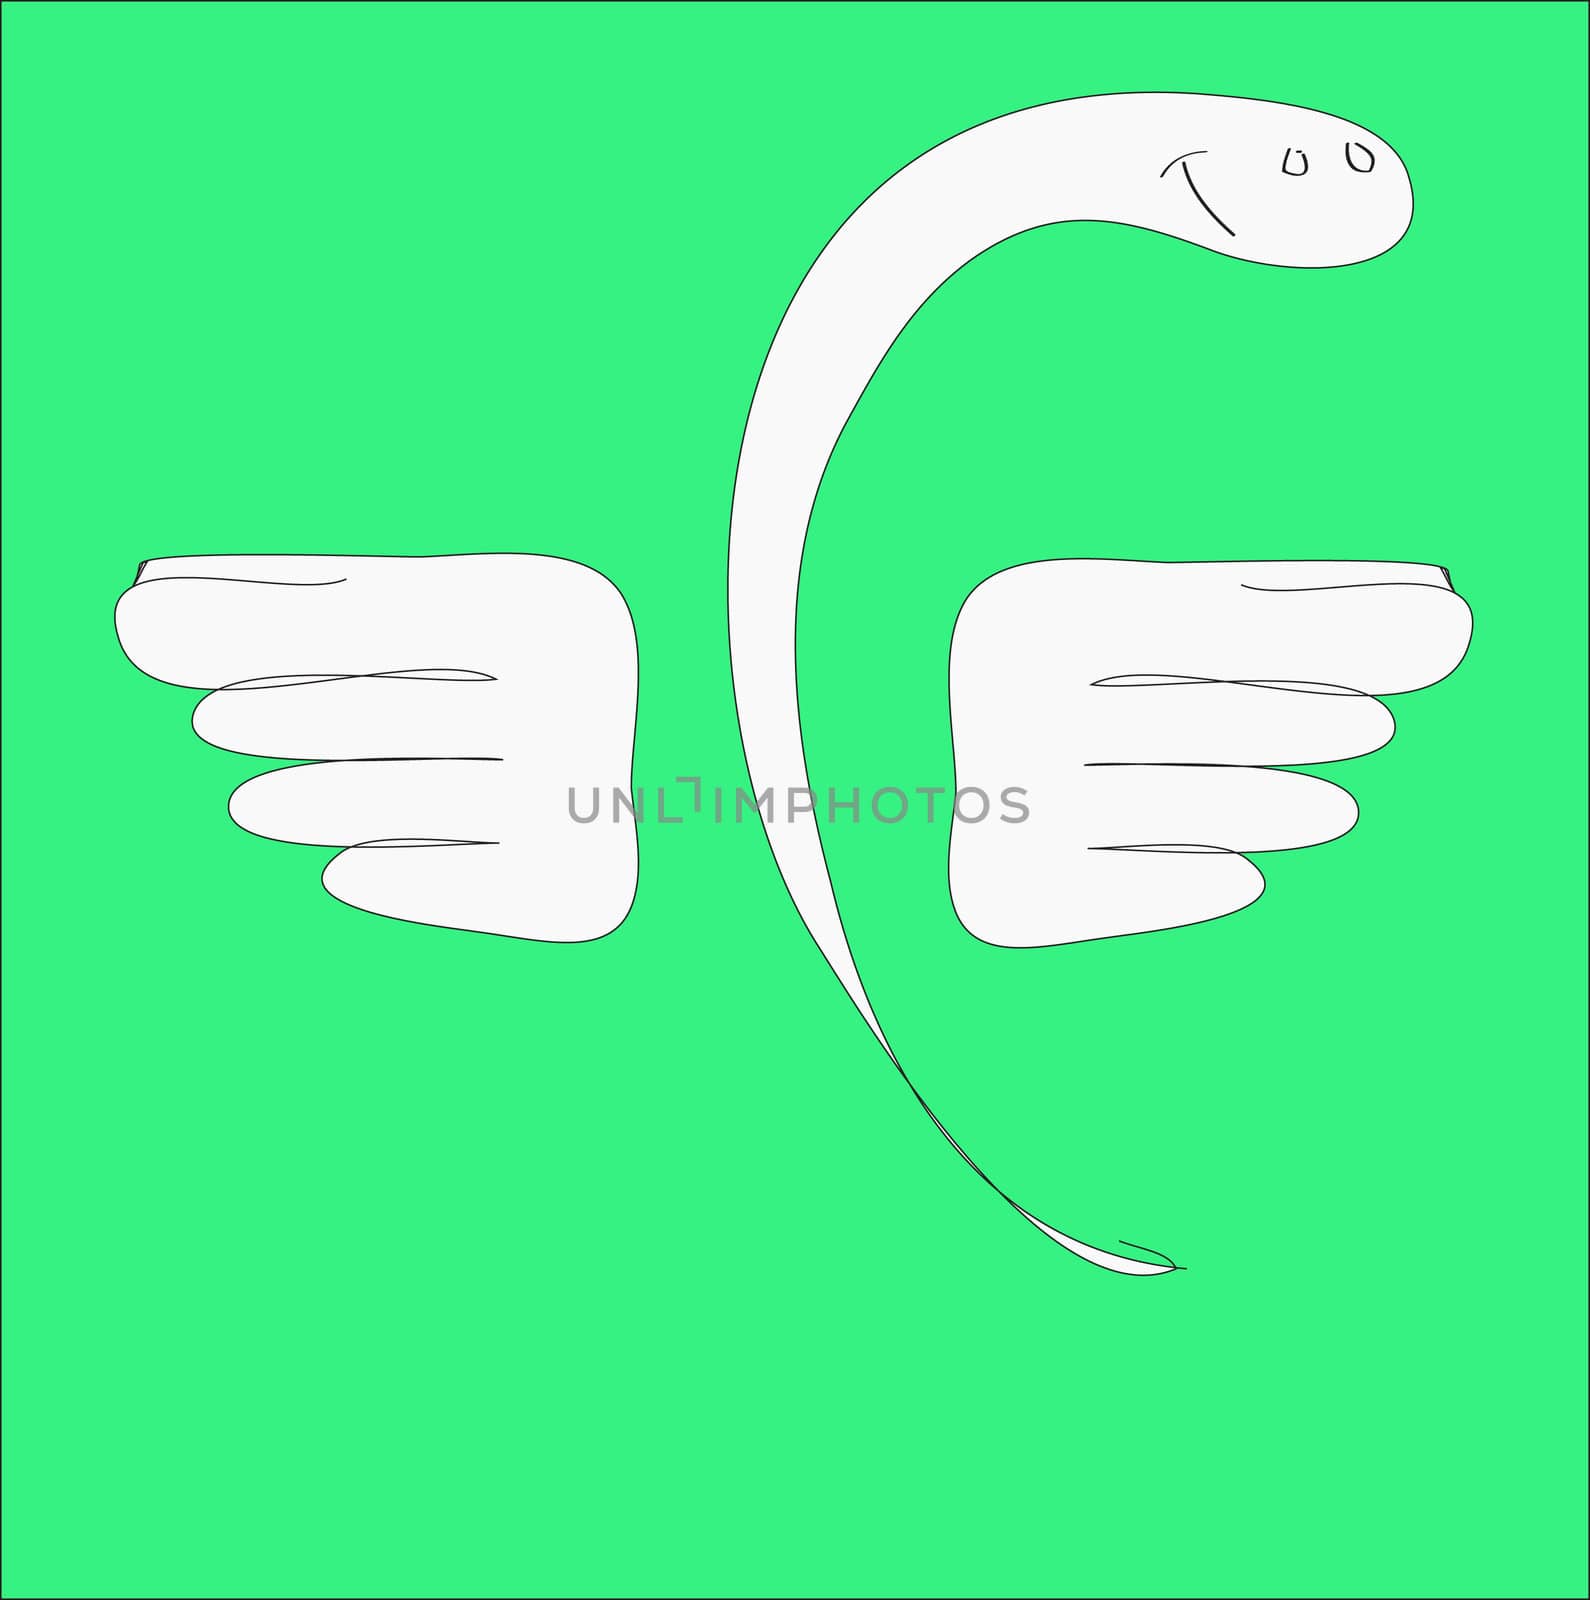 Illustration of charming snakes with wings smiles